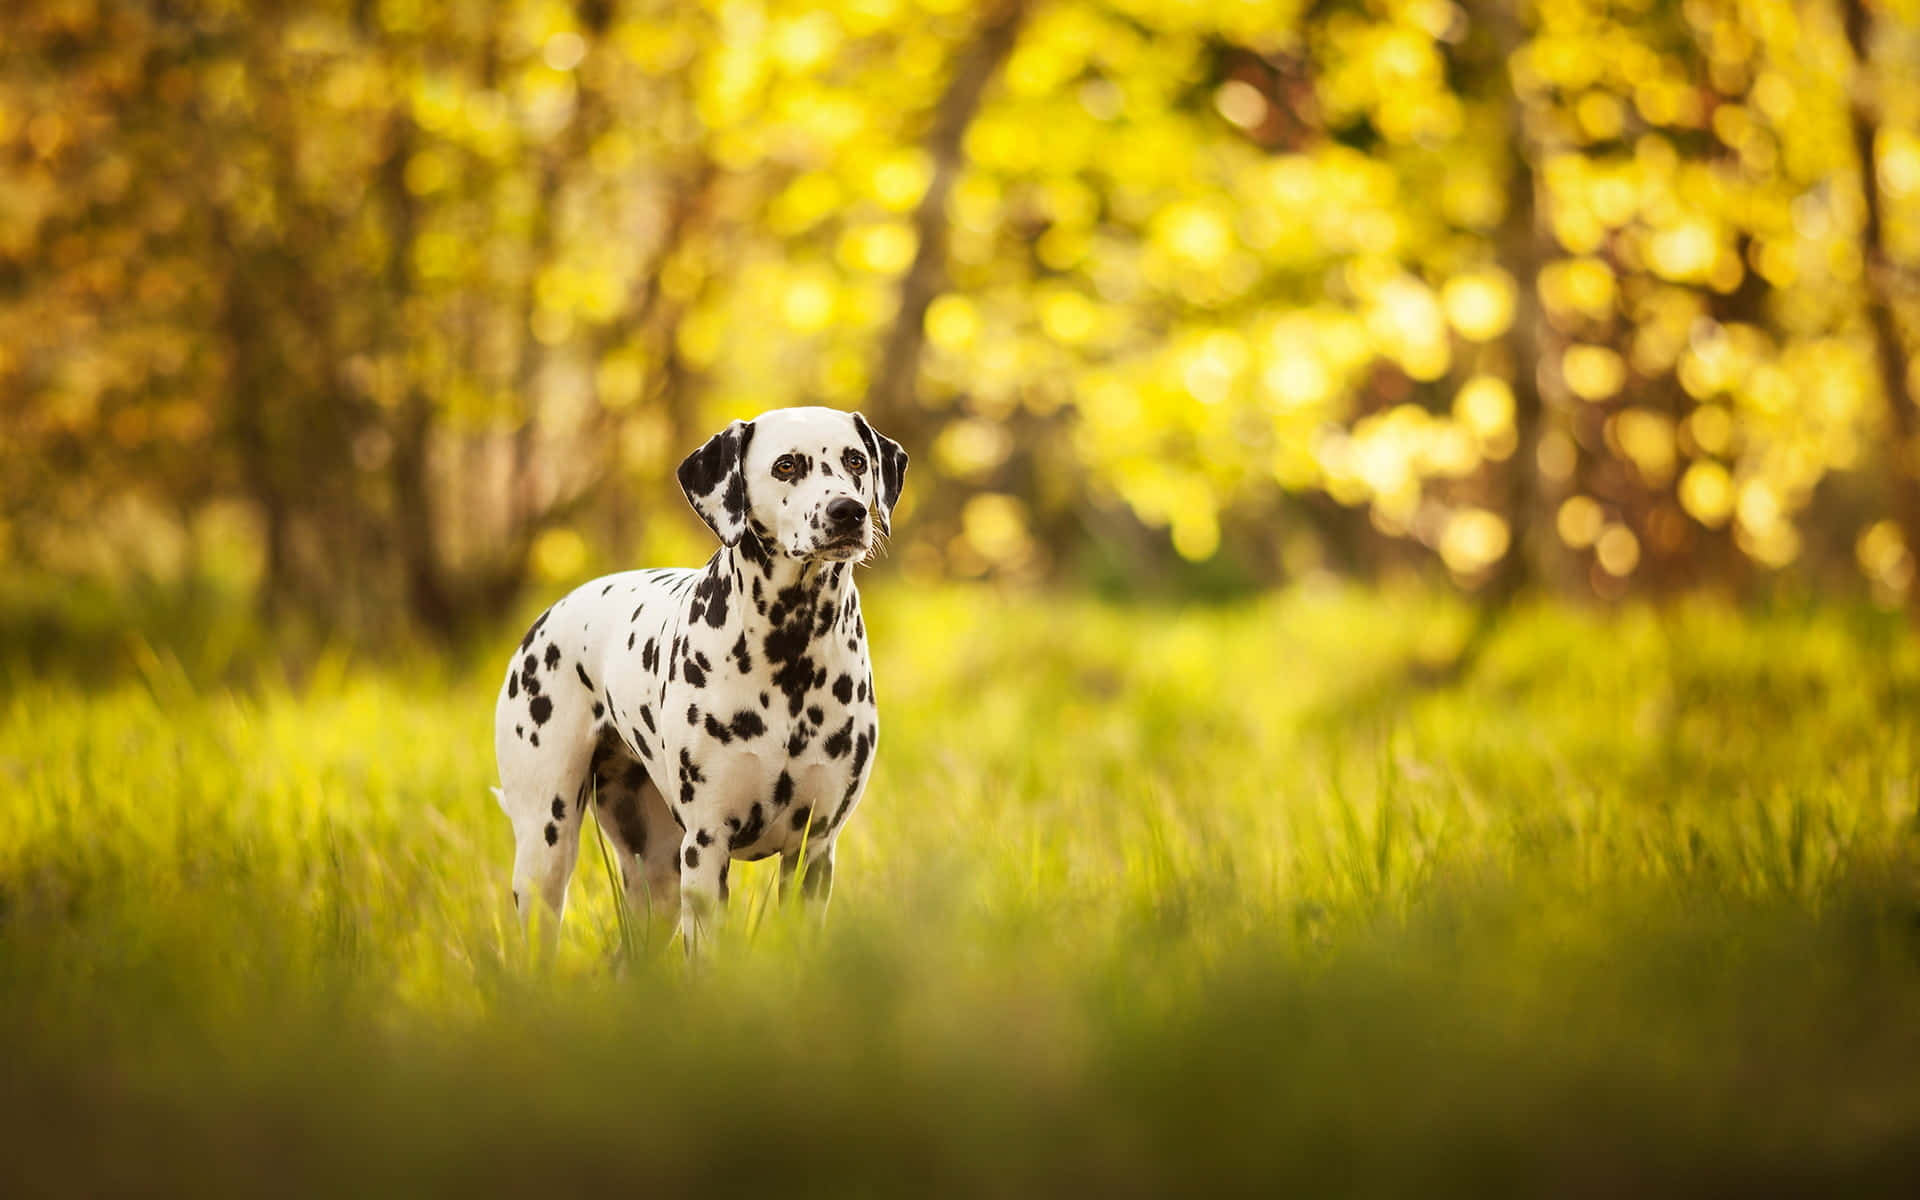 A Dalmatian puppy lying in a meadow of lush, green grass